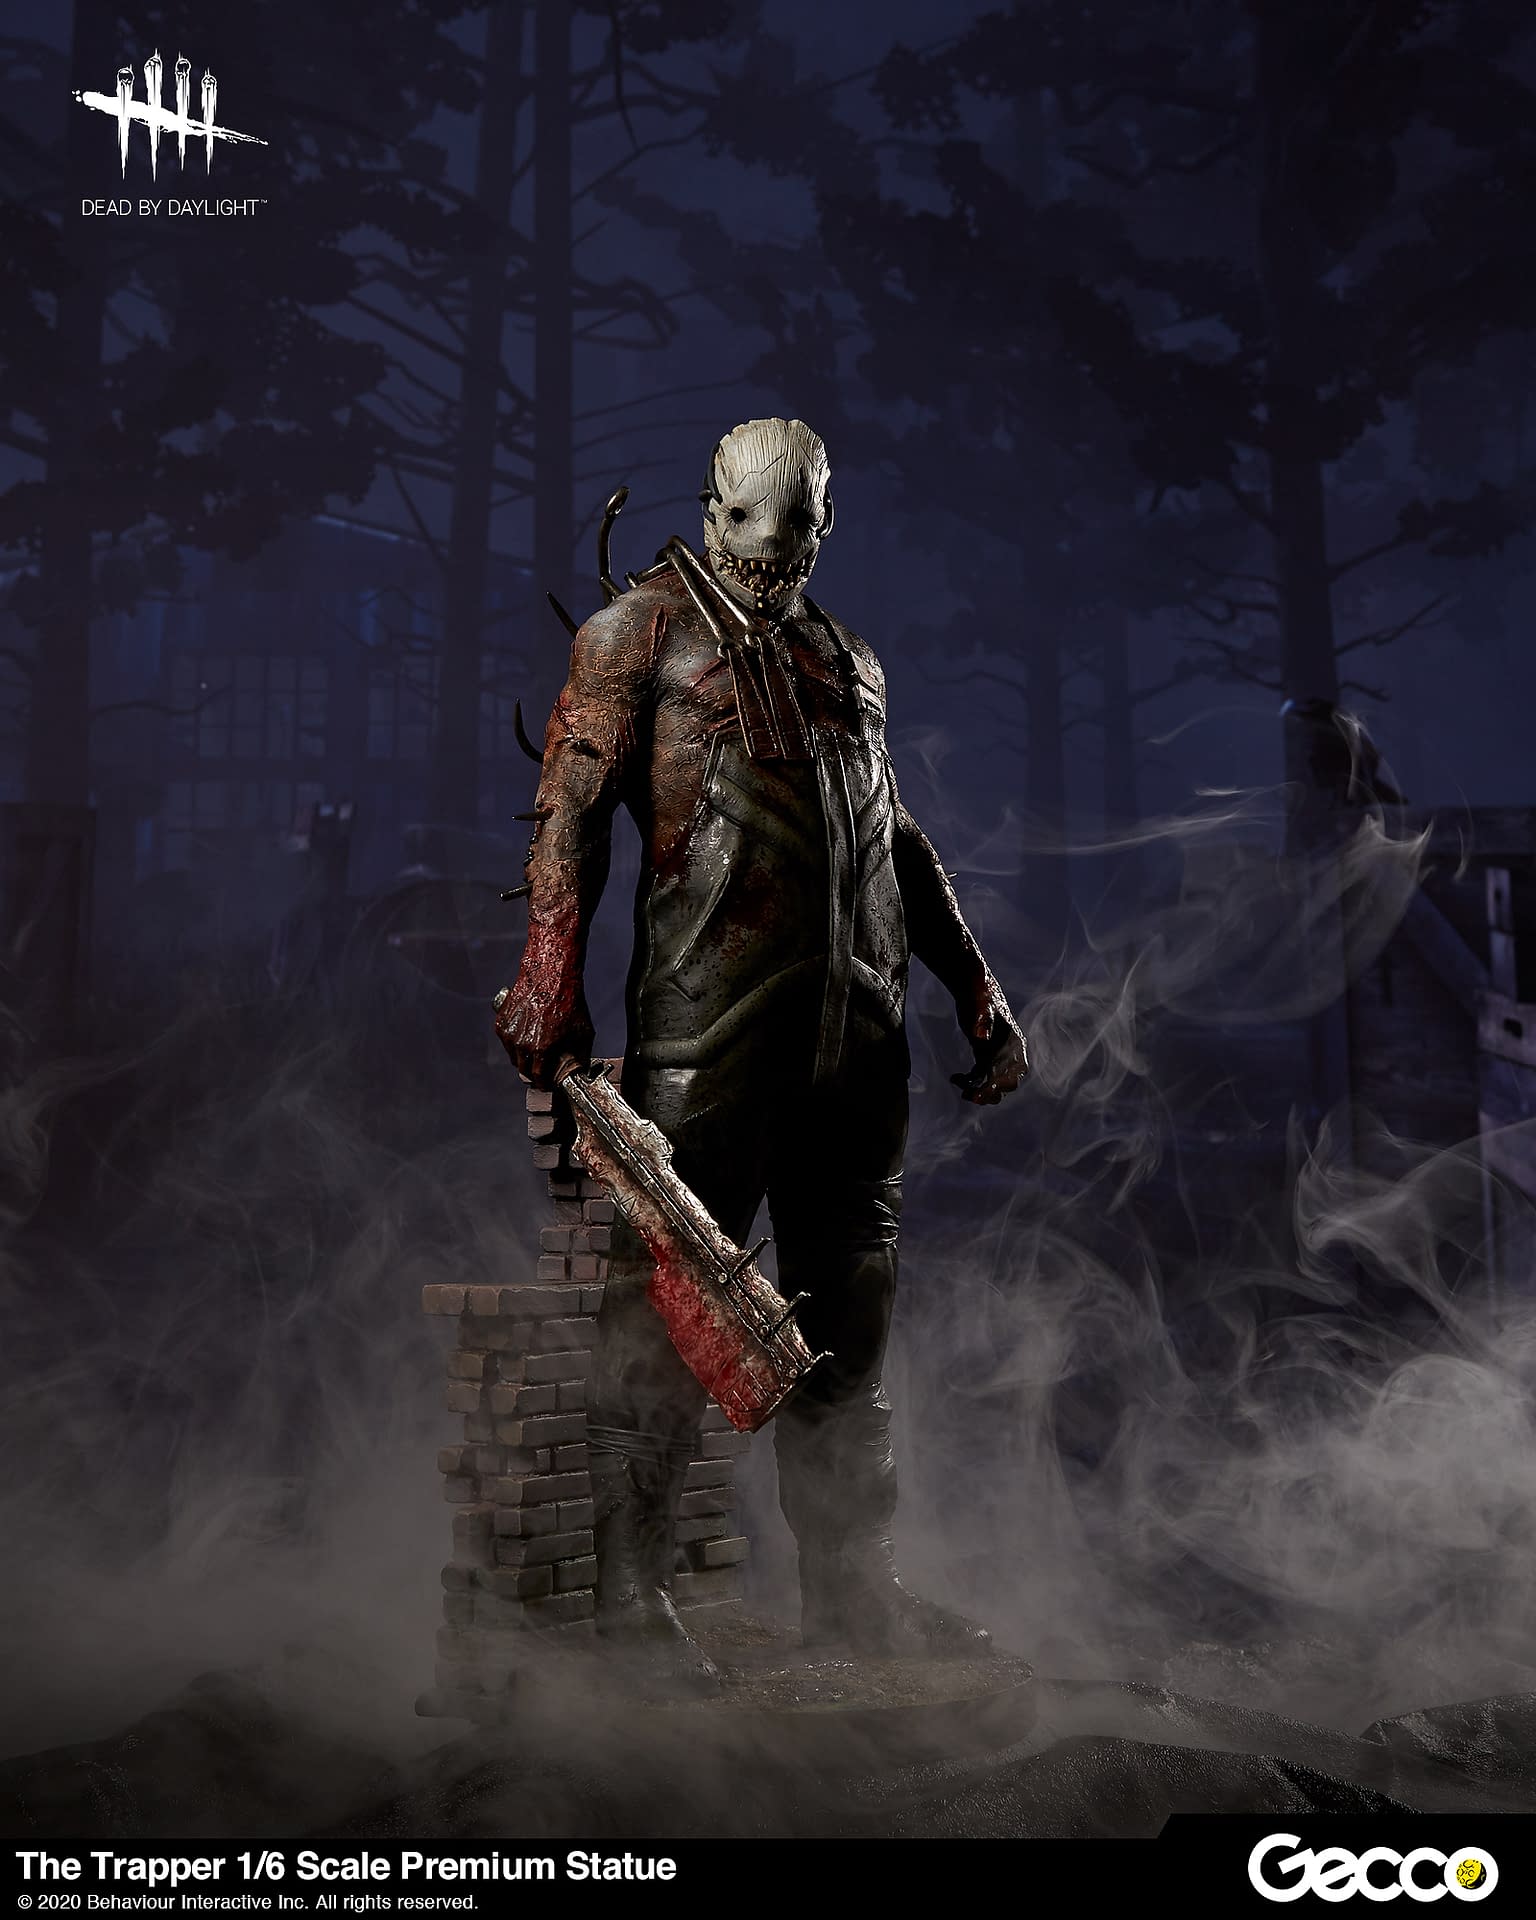 "Dead by Daylight" Sets A Trap With New Statue from Gecco